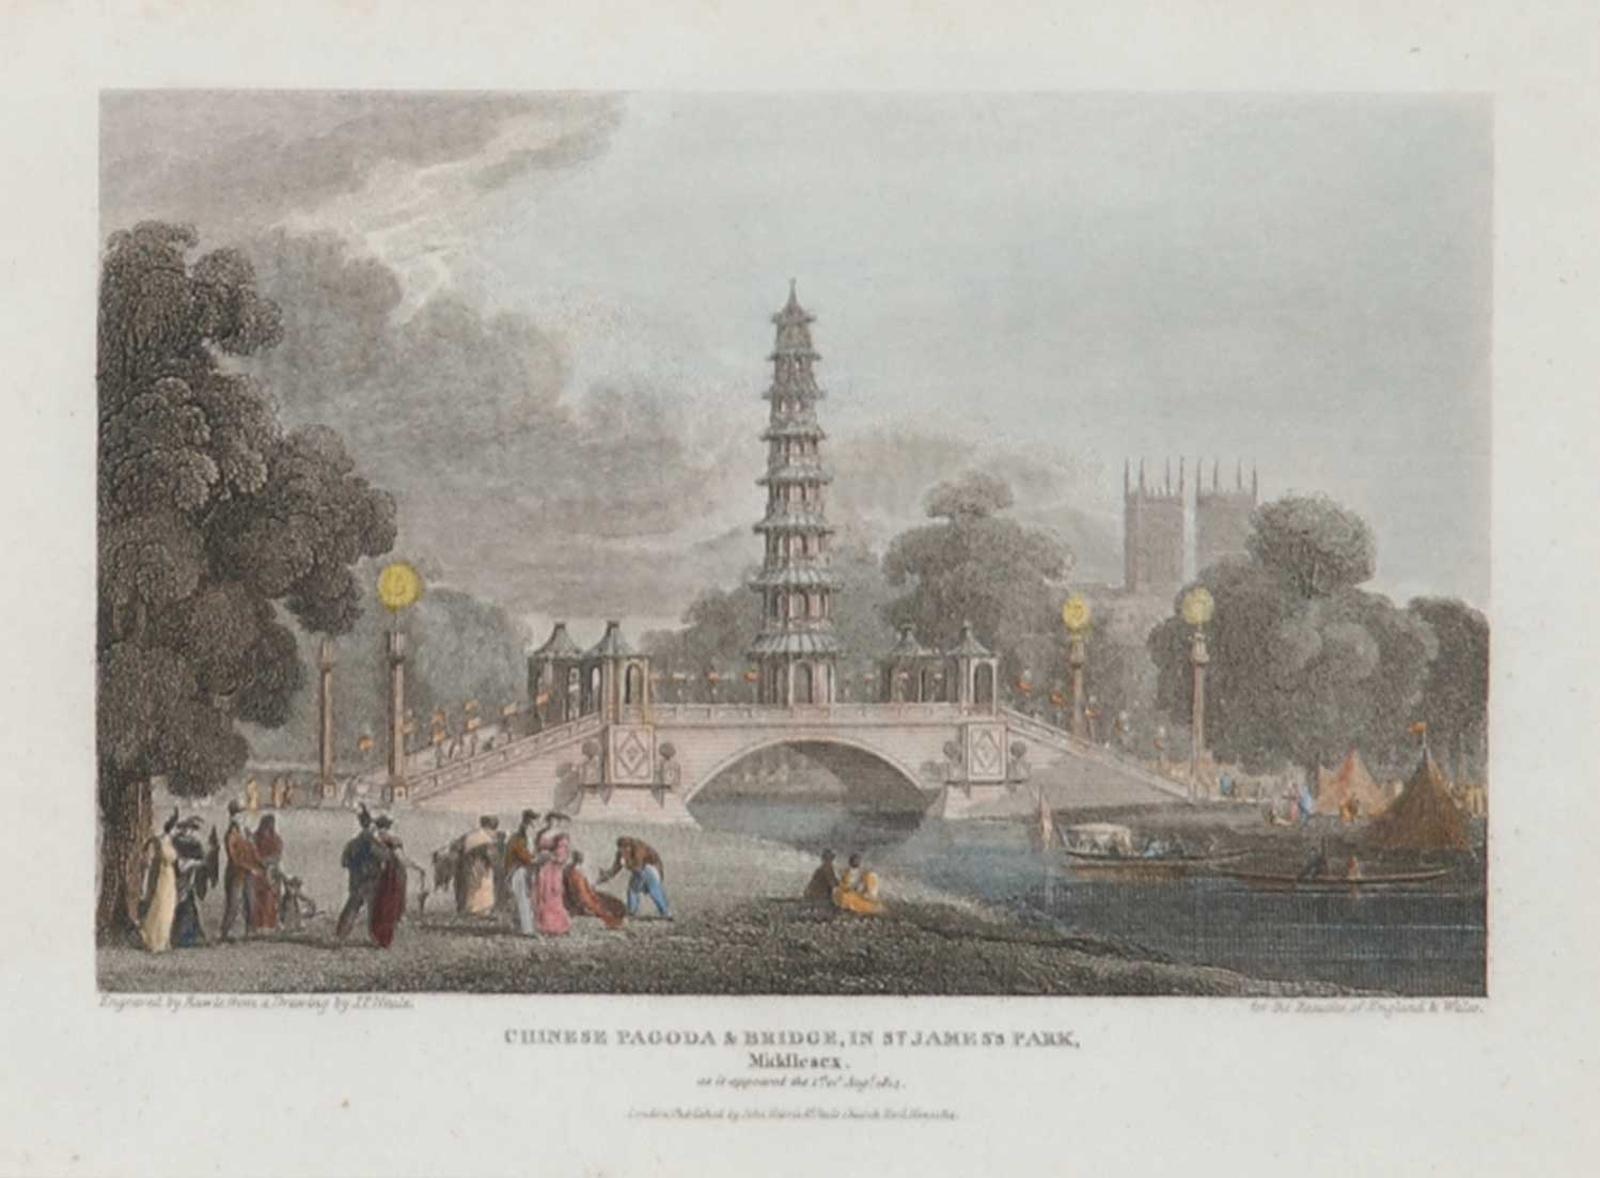 J.P. Neale - Chinese Pagoda and Bridge, In St. James's Park, Middlesex. as it appeared the 1st of Aug, 1814